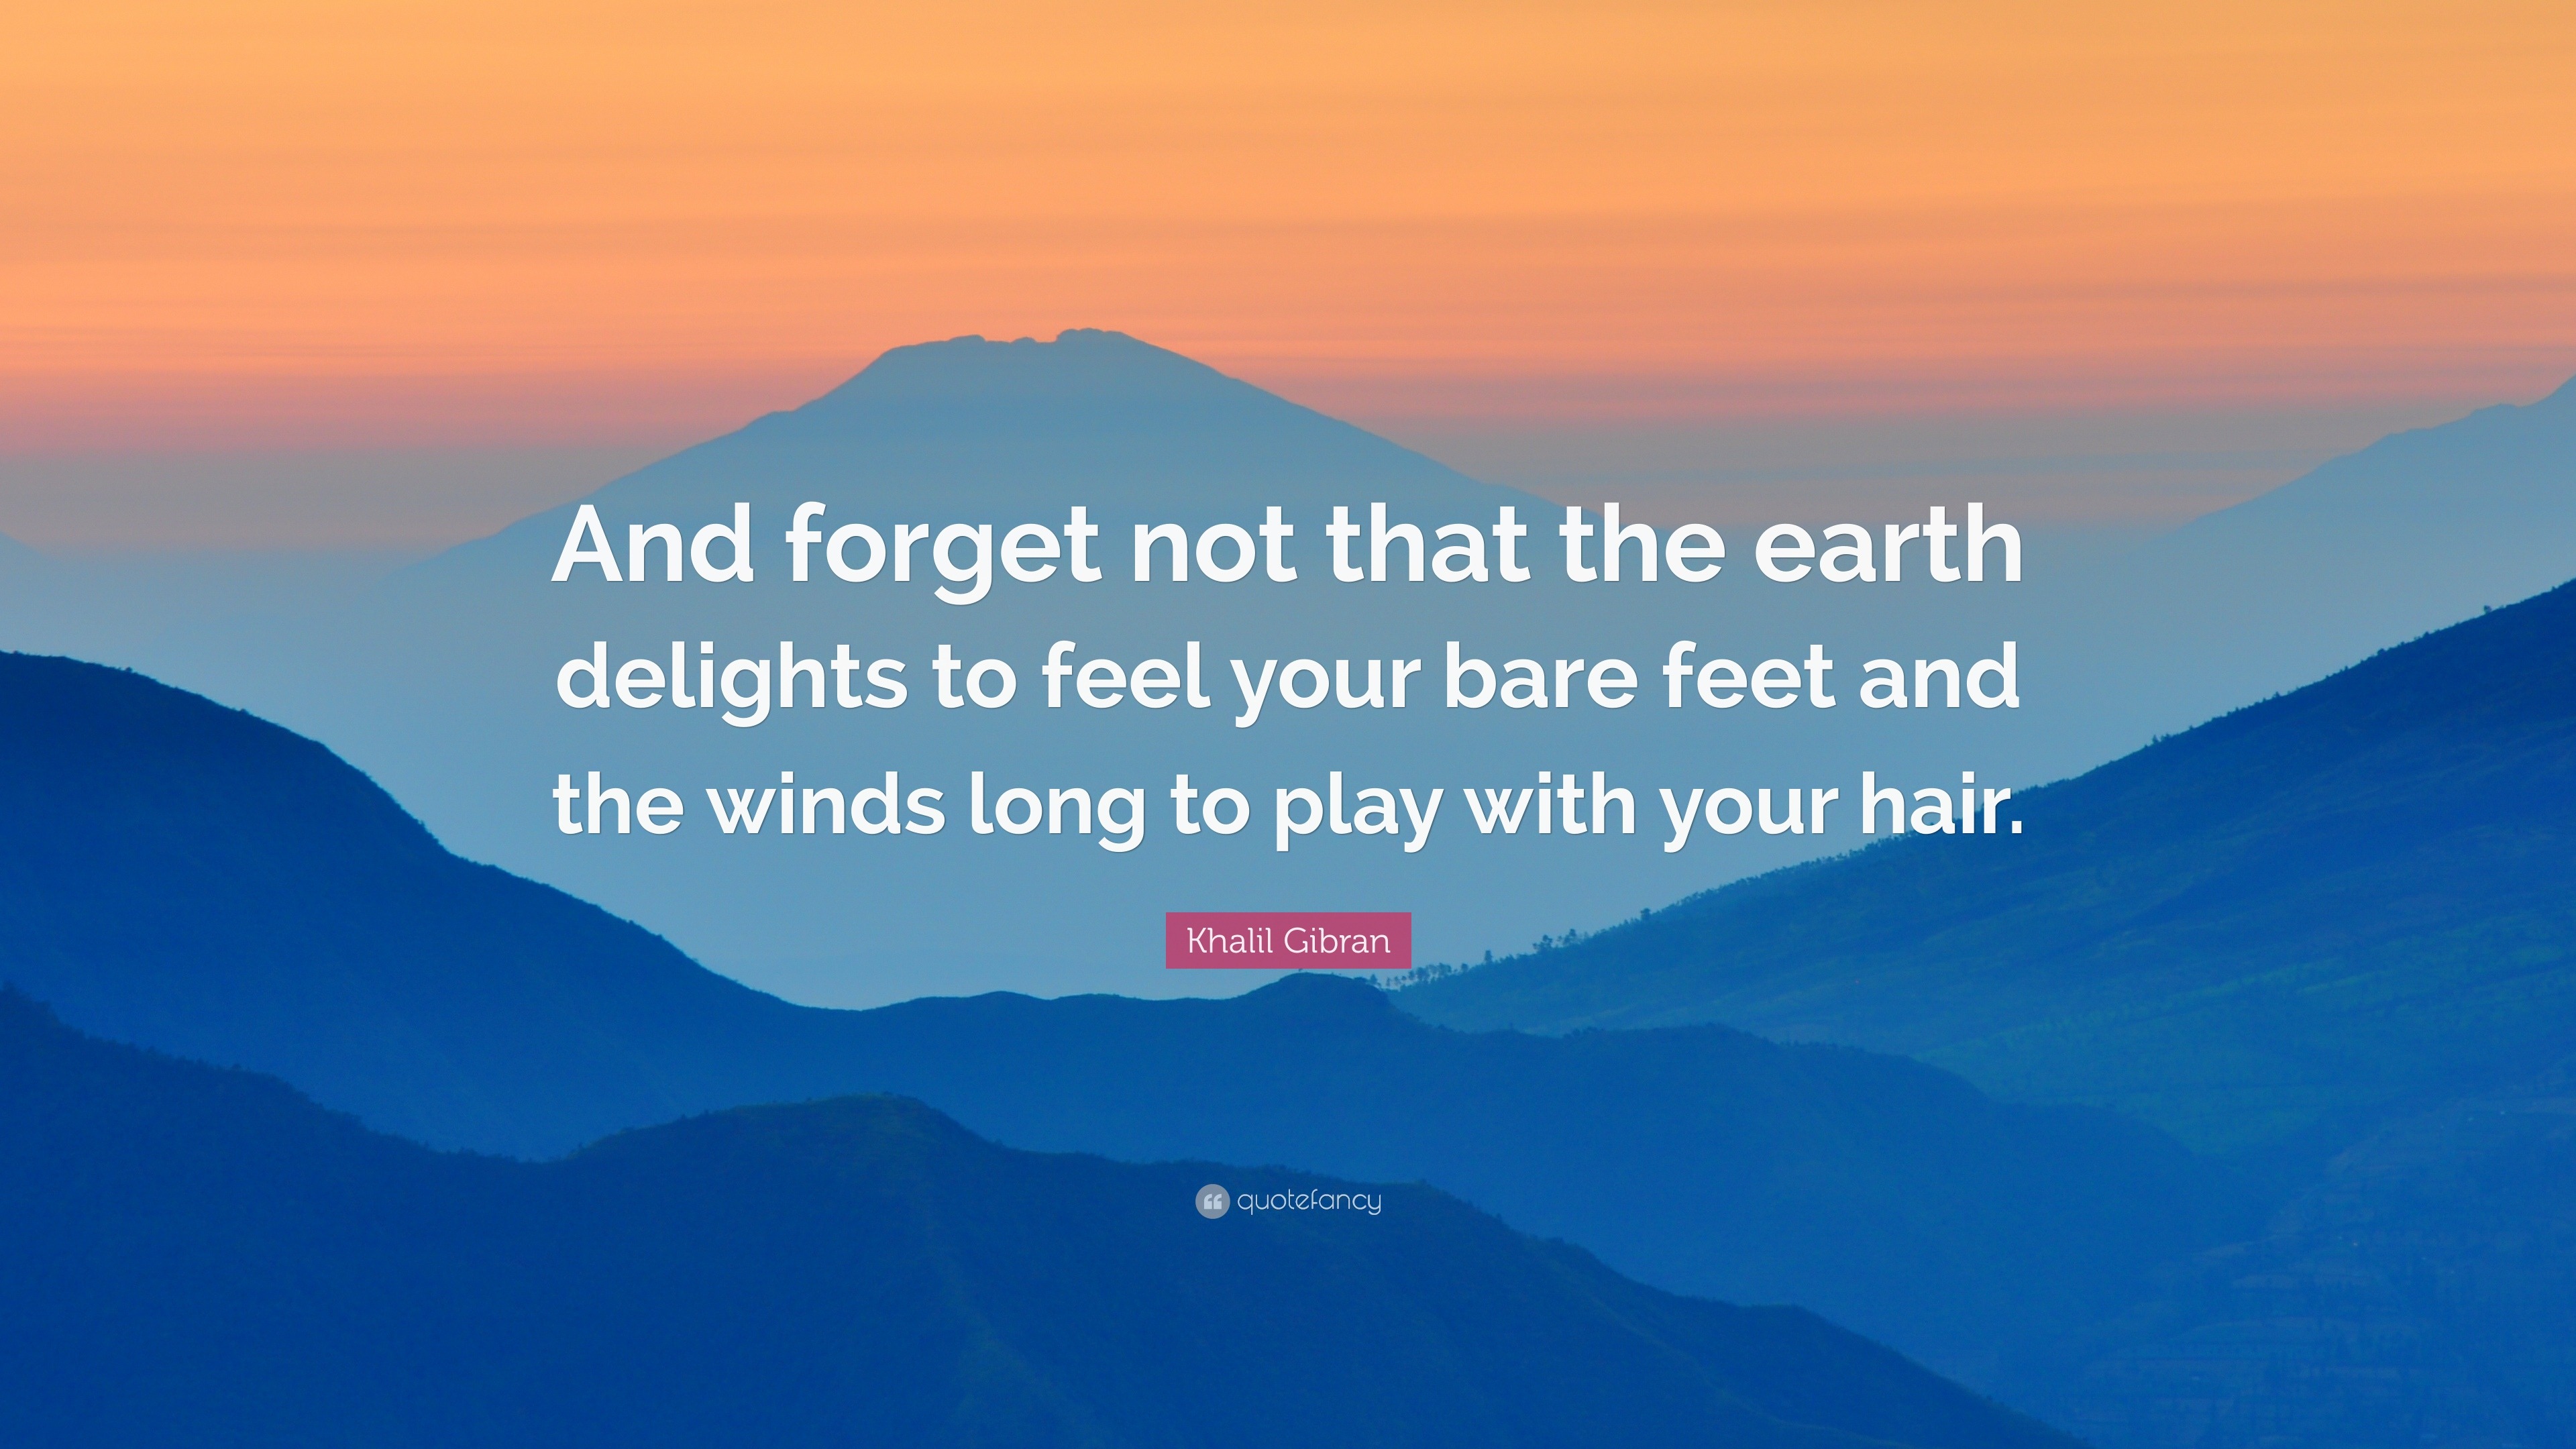 Khalil Gibran Quote: “And forget not that the earth delights to feel ...